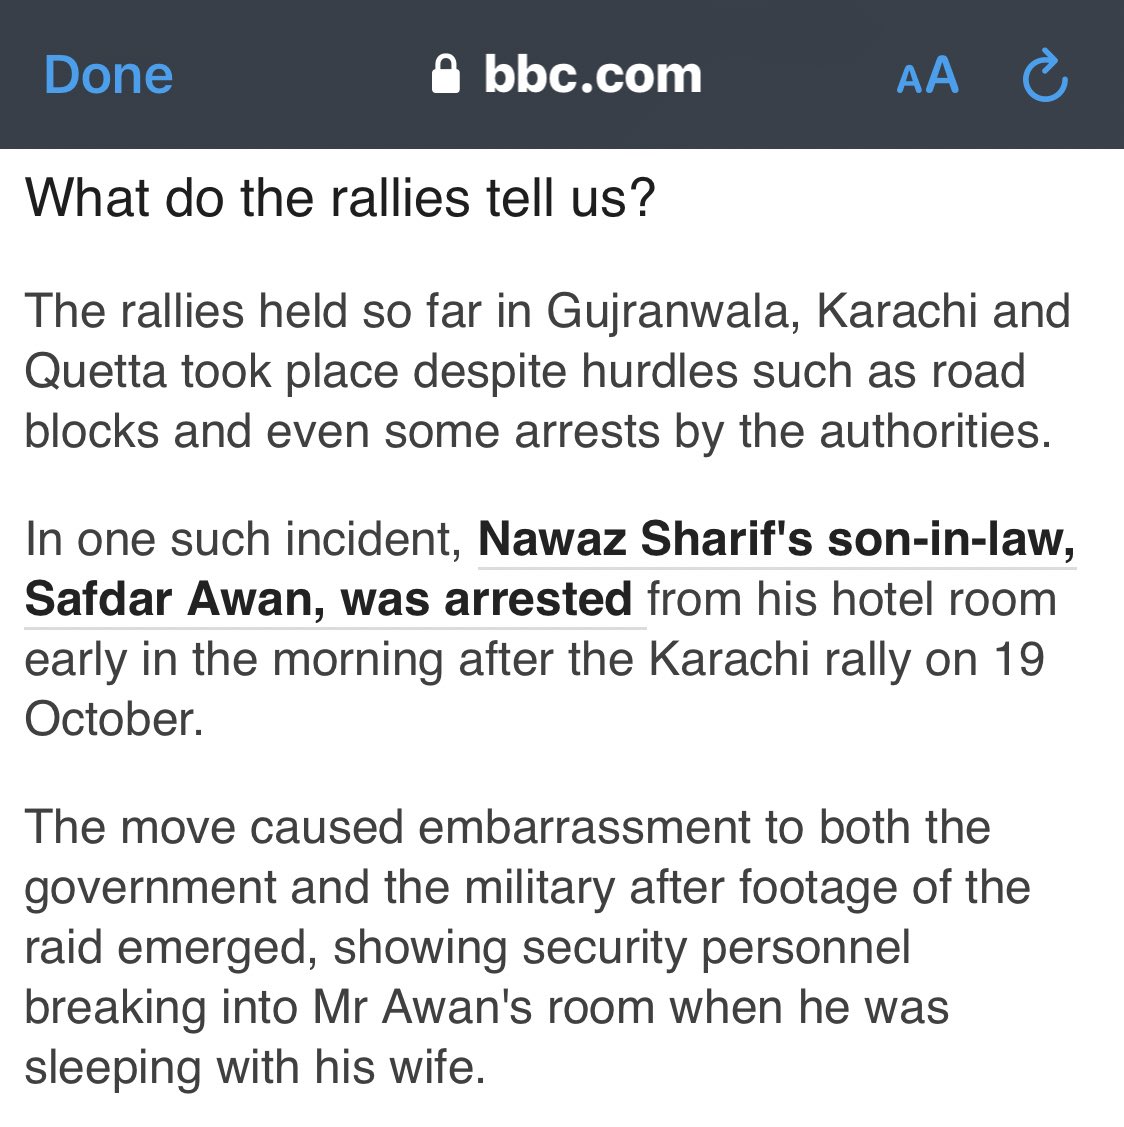 1:While writing about the arrest of Mian Nawaz Sharif’s son-in-law Safdar Awan who is infamous for his provocative anti-minority rants, the piece conveniently forgets to even mention the fact that he DID violate law by disrespecting Quaid-e-Azam’s mausoleum with his hooliganism